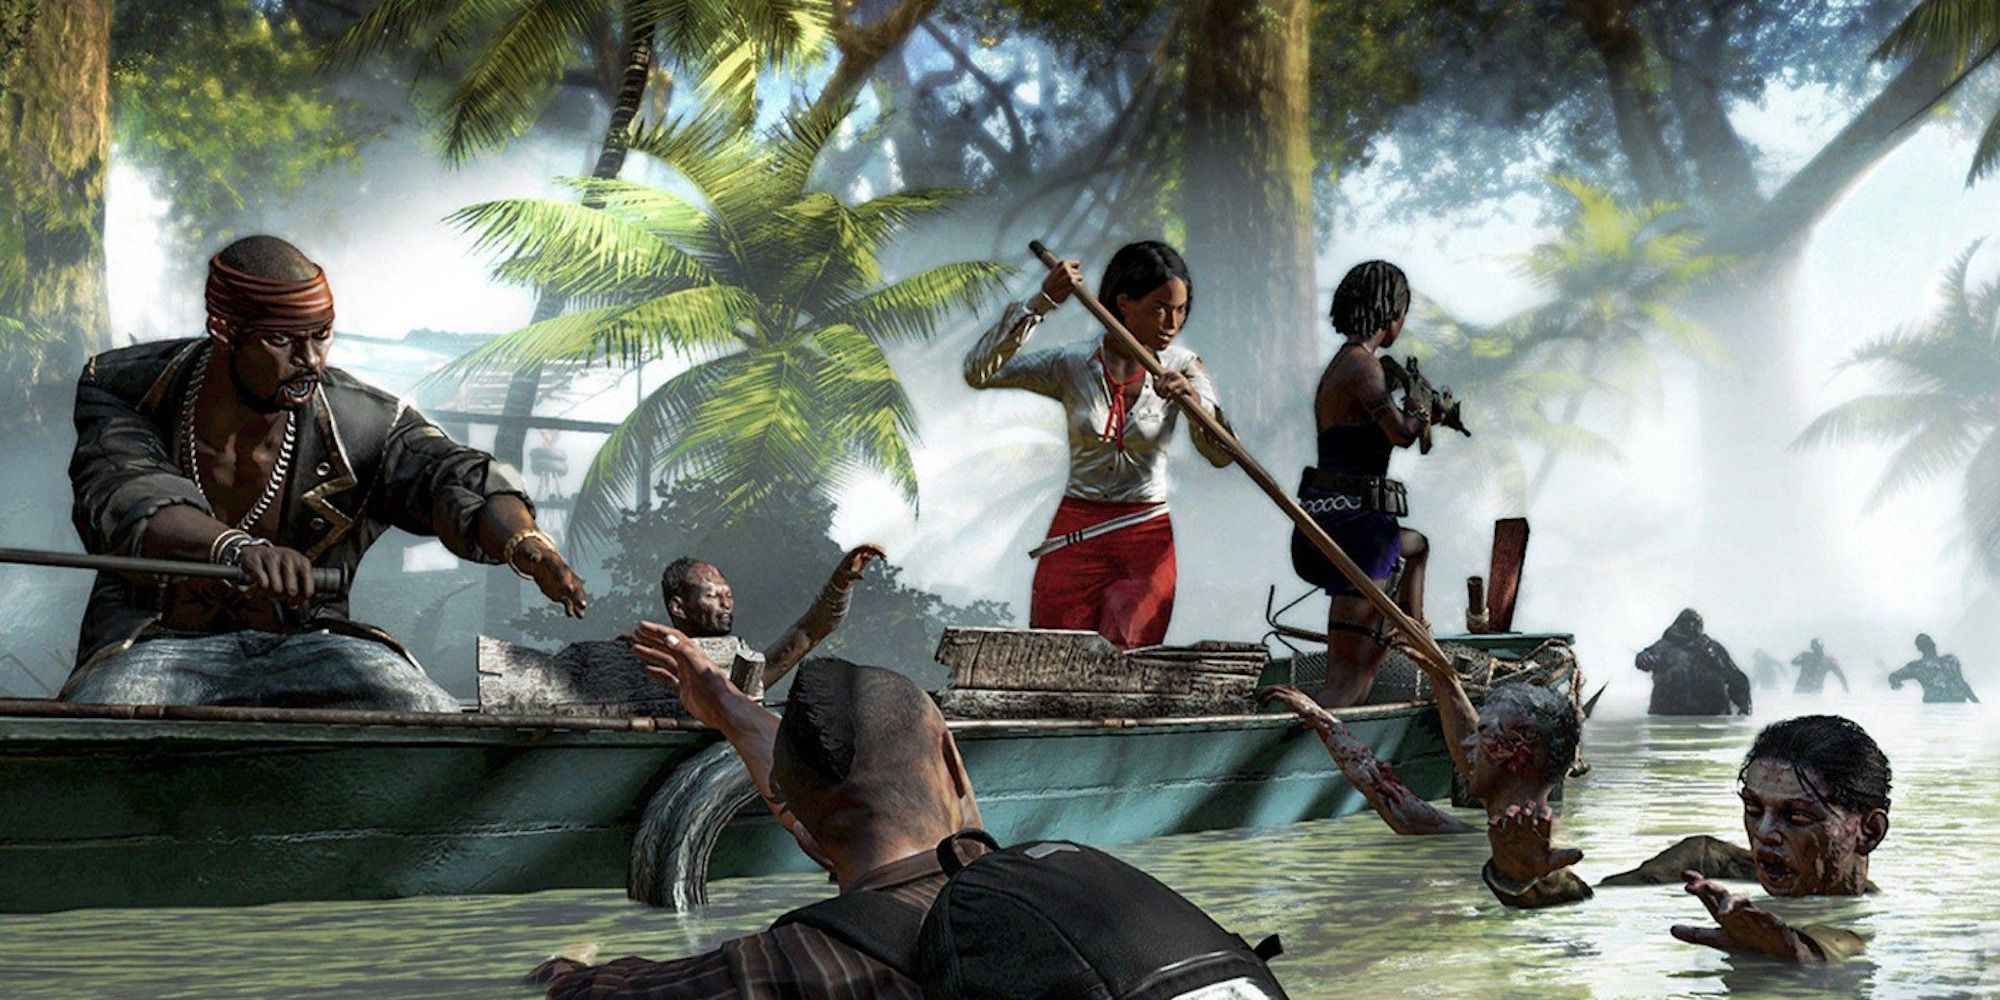 Promo art featuring the main cast fighting zombies from Dead Island